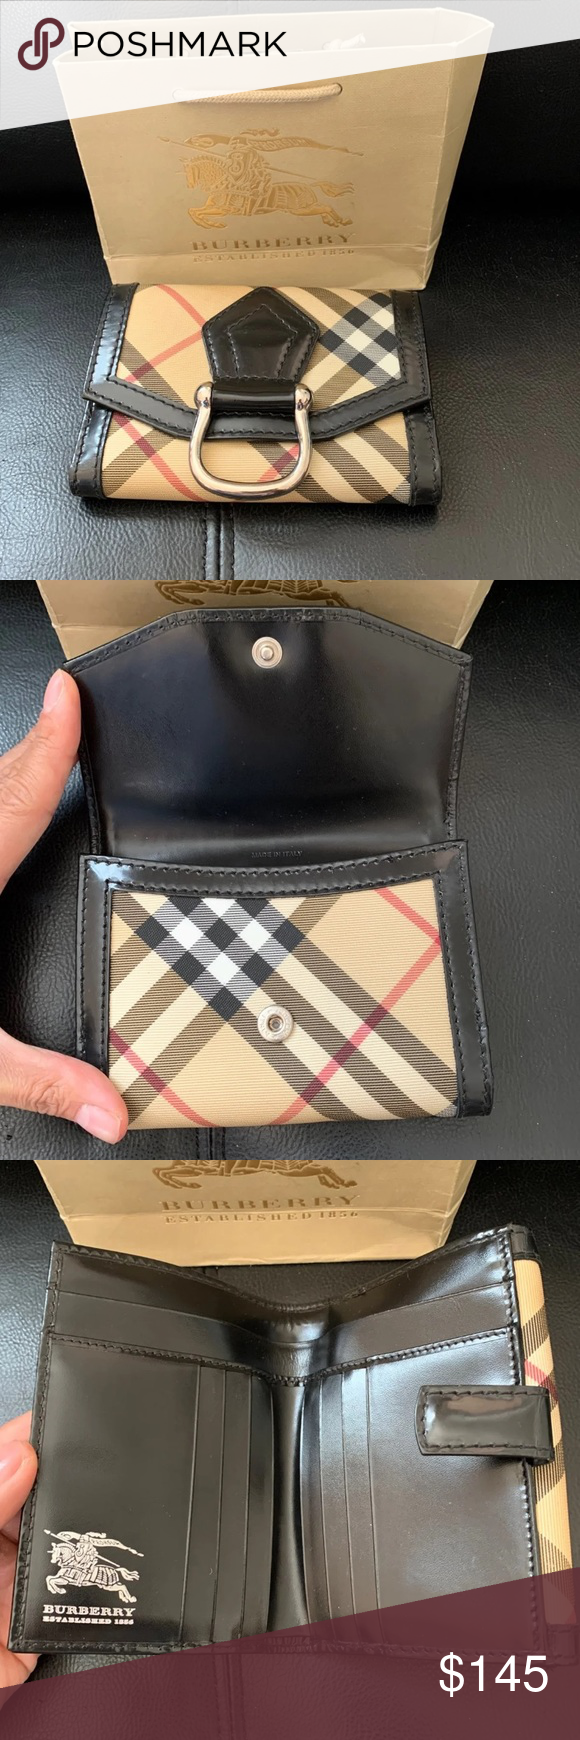 burberry serial number